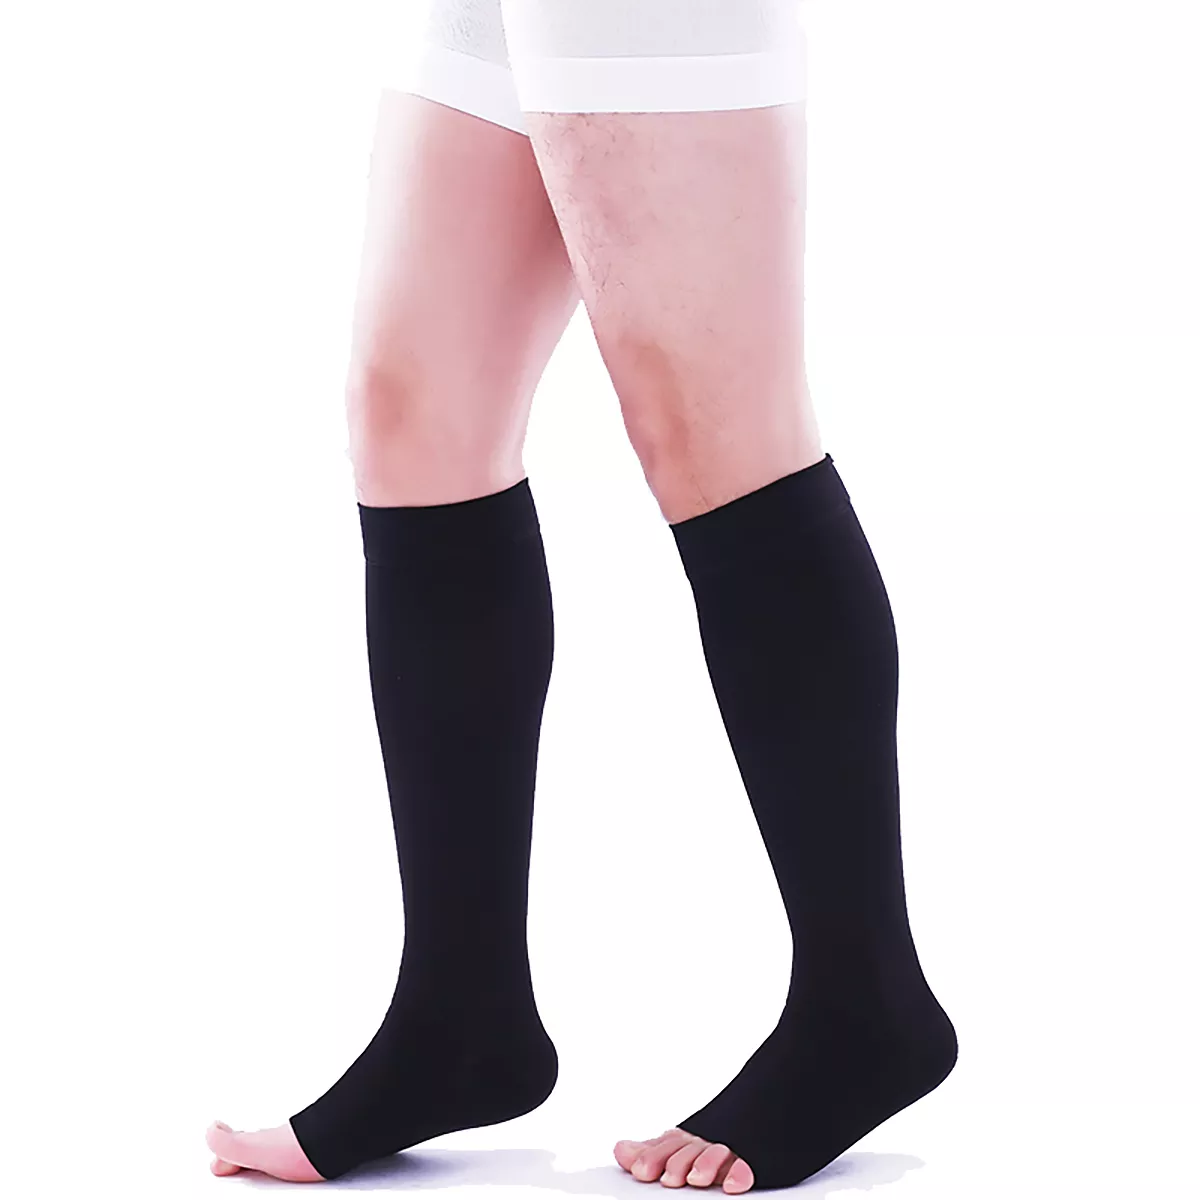 EASE Opaque Unisex Open Toe Compression Knee High 15-20 mmHg